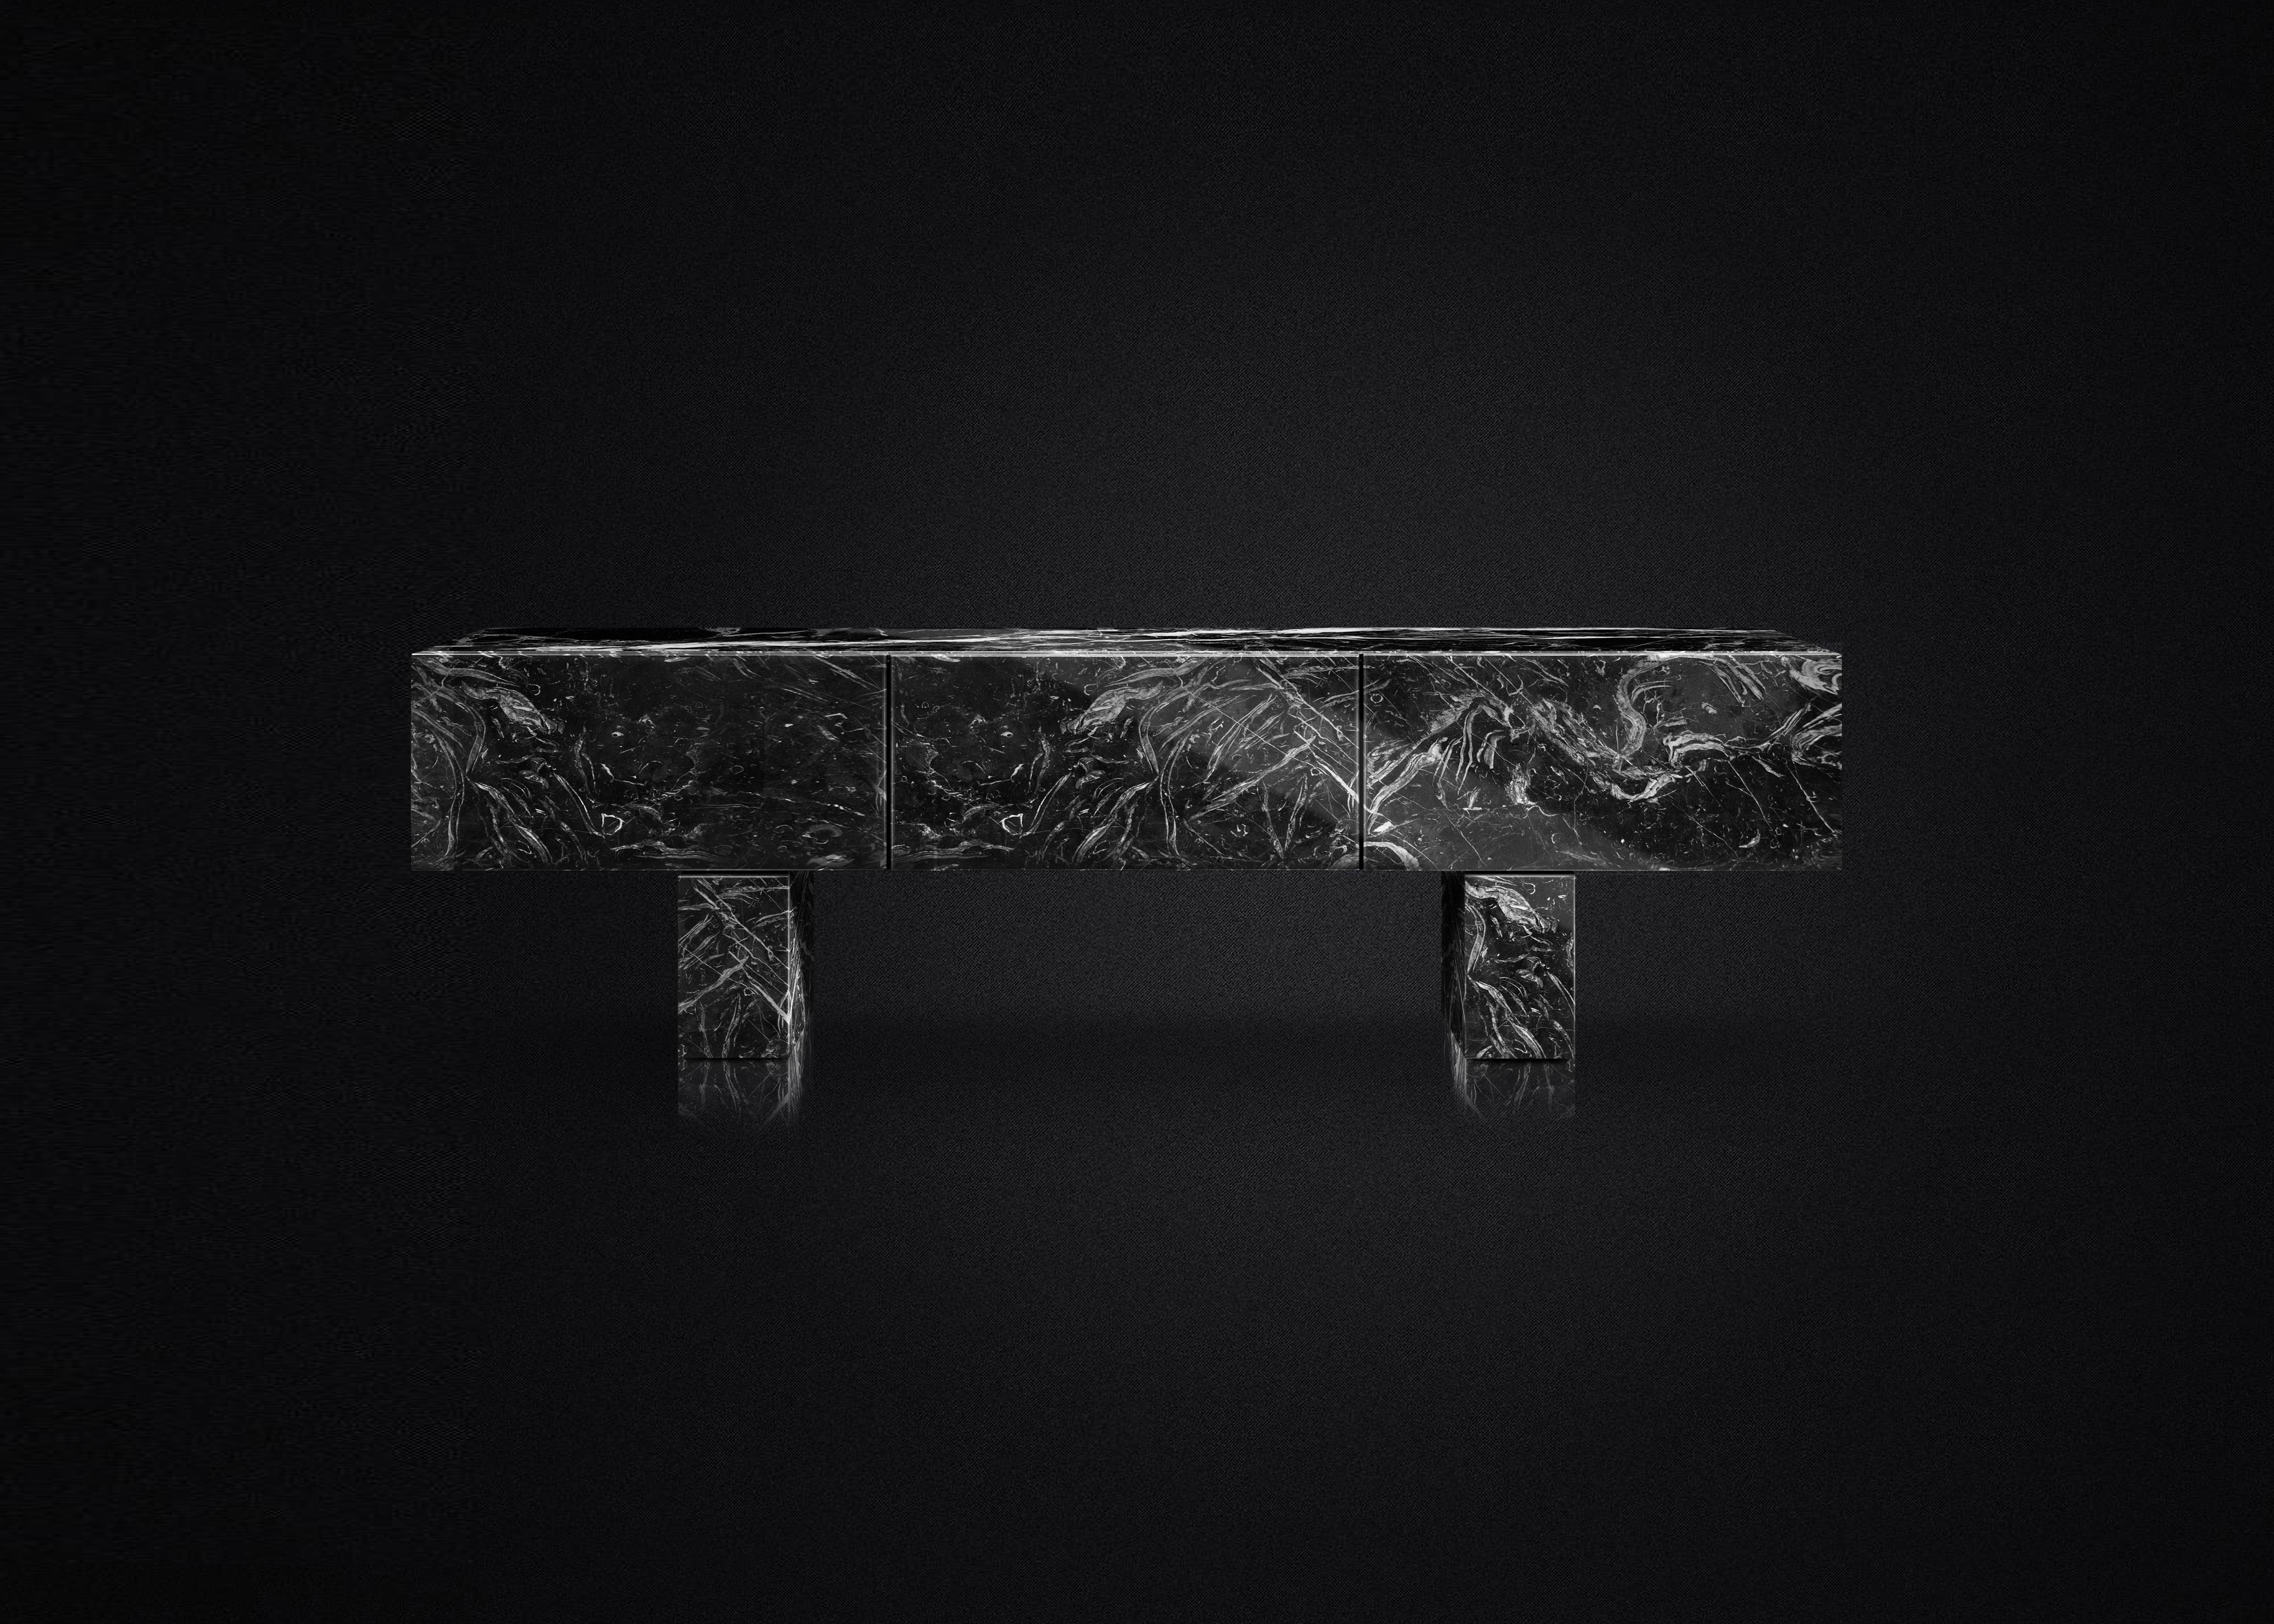 Console Diablo.

Directly inspired by natural beauty of Iceland. Made of black Nero Marquina marble. Interior in Macassar Ebony veneer.
Contemporary, luxurious and impeccably crafted, this console makes a beautiful home investment. The design works